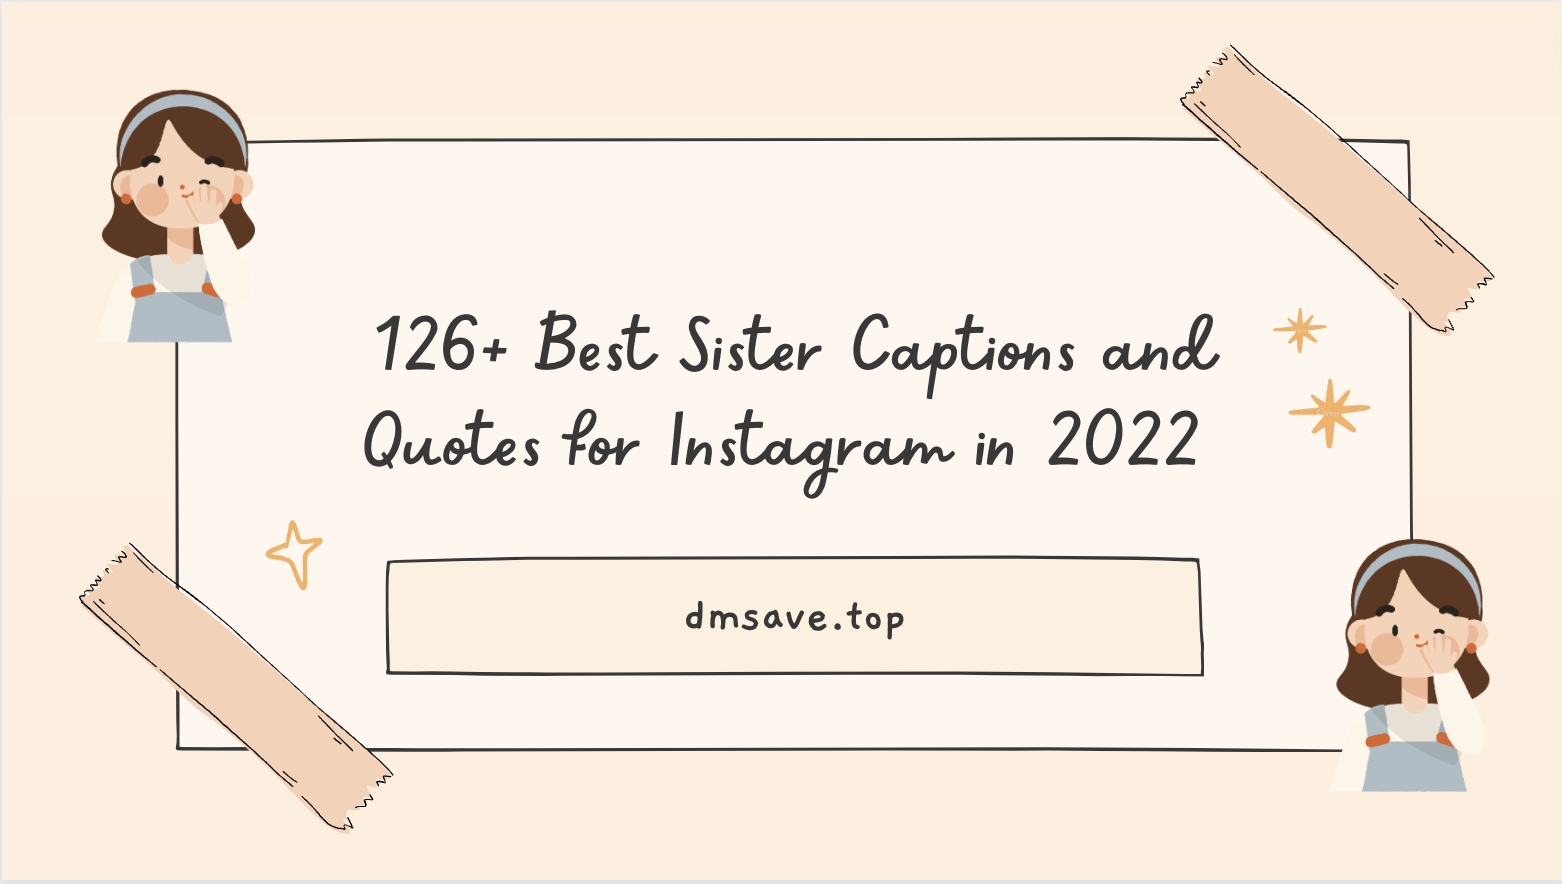 126+ Best Sister Captions and Quotes for Instagram in 2022 [Free to Copy]